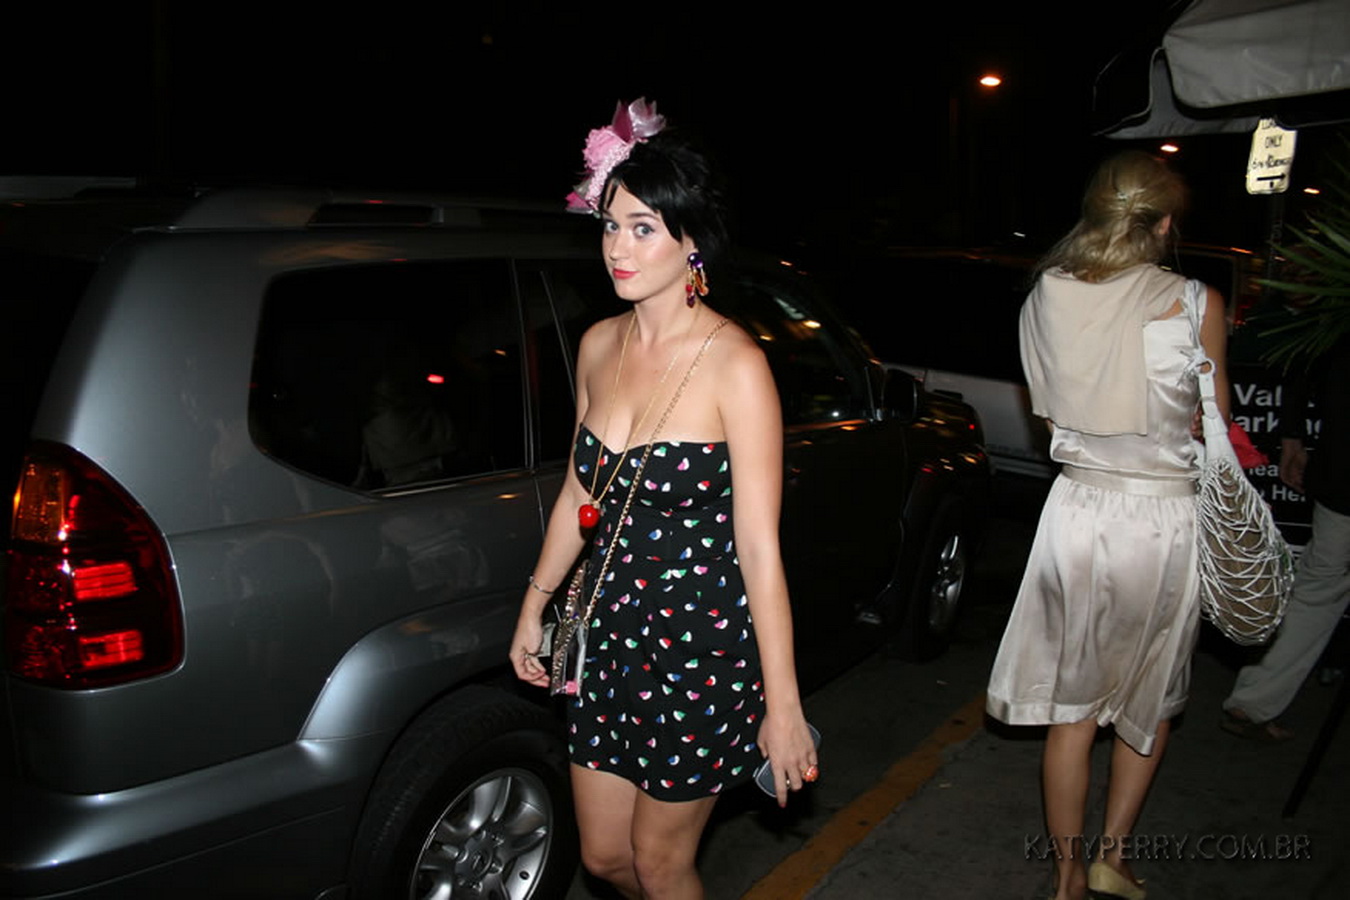 Katy_Perry_bobsslip_drunk_cleavage_downblouse_upskirt_nipslip_at_her_birthday_2007_party_99x_HQ_24.jpg